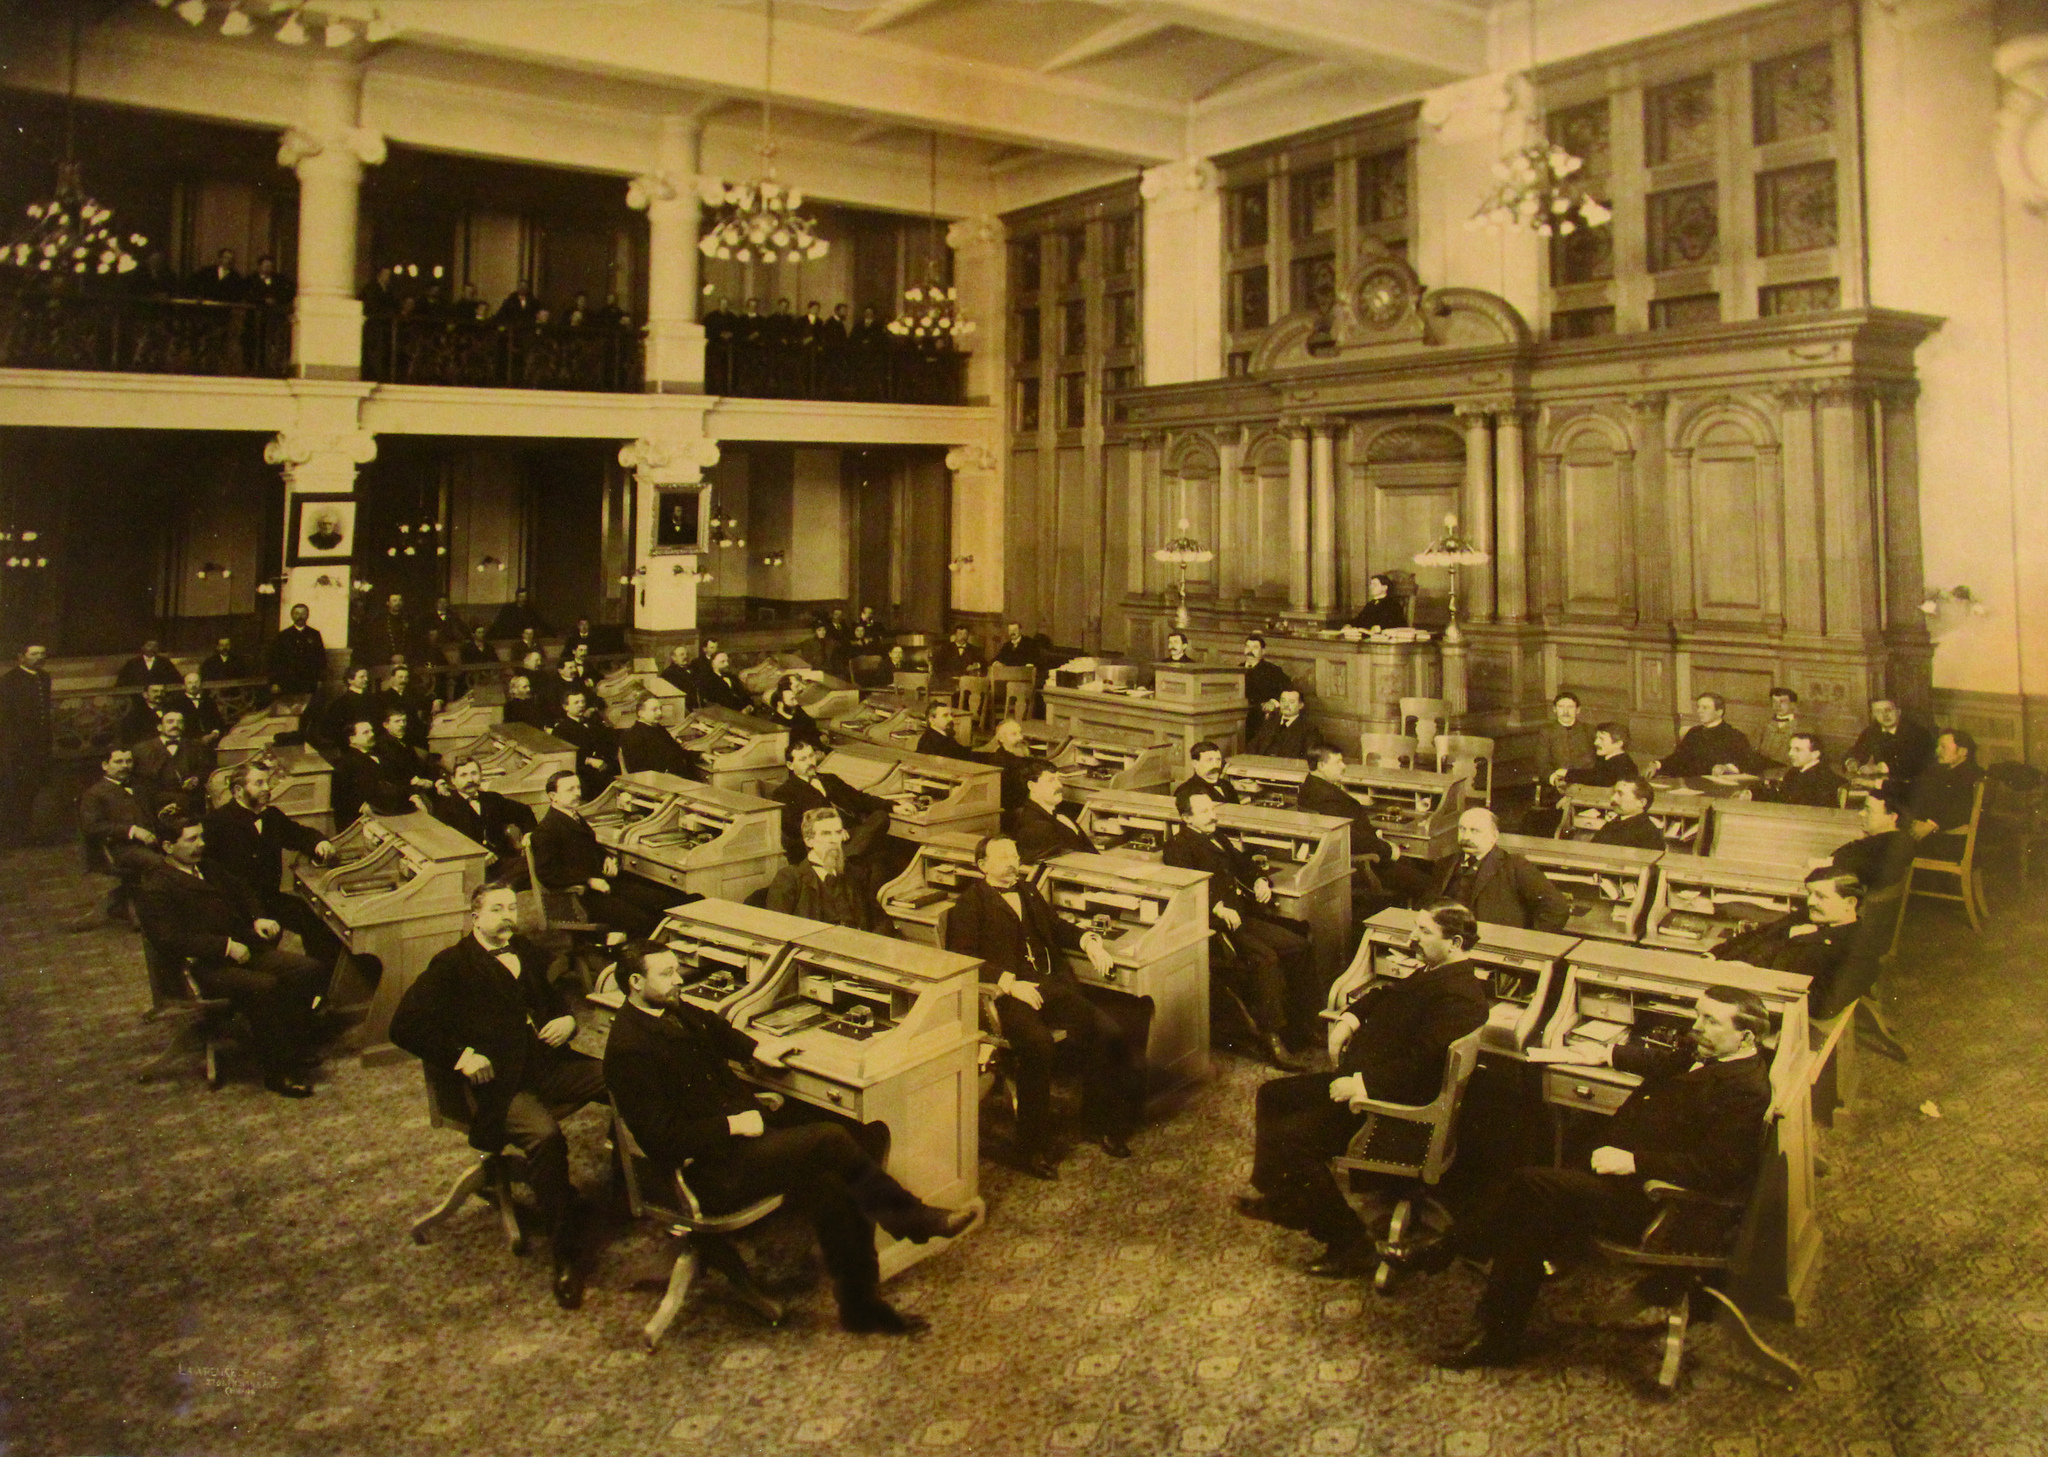 In this photo, the 1898-1899 Common Council members gather in the council chambers. Until 1956, Milwaukee's Common Council members were all white males. 